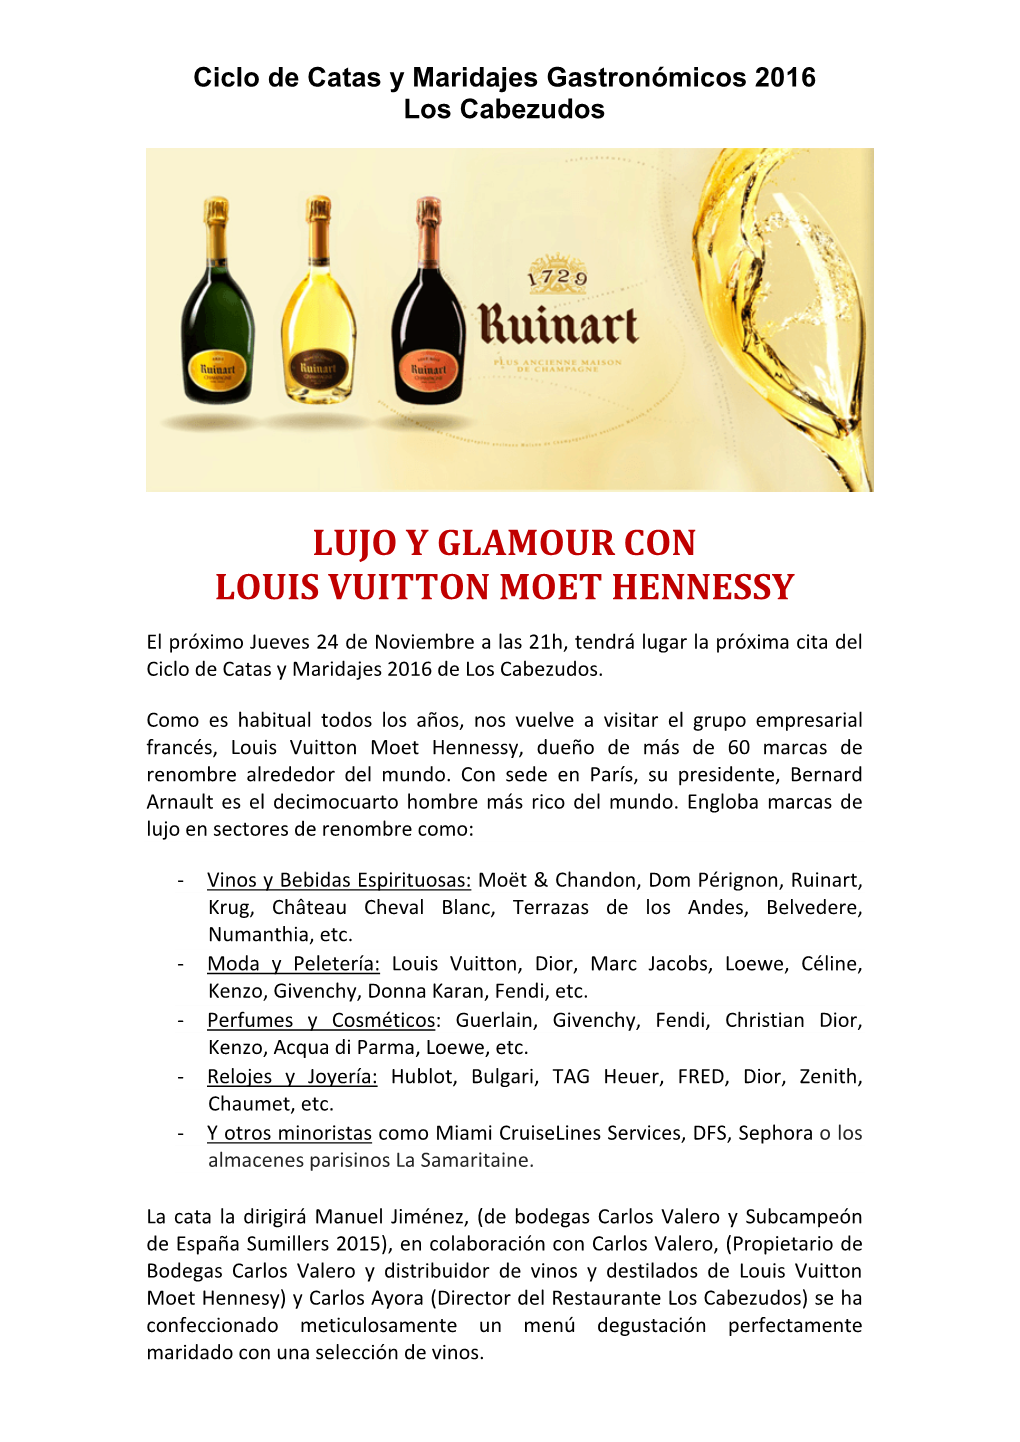 Lujo Y Glamour Con Louis Vuitton Moet Hennessy